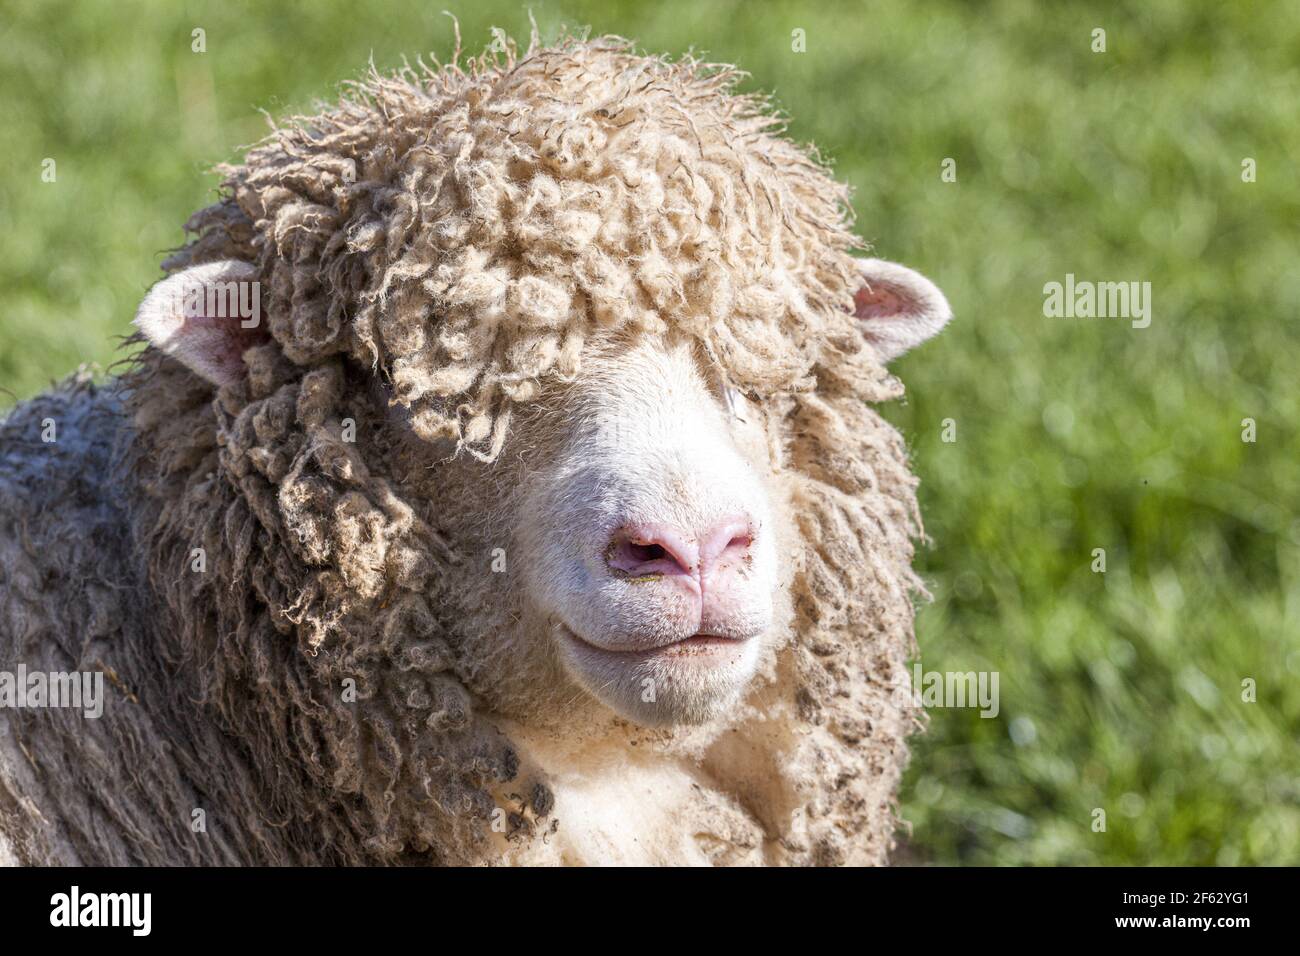 A close up portrat of a Cotswold sheep (ewe) in the Cotswold village of Middle Duntisbourne, Gloucestershire UK Stock Photo